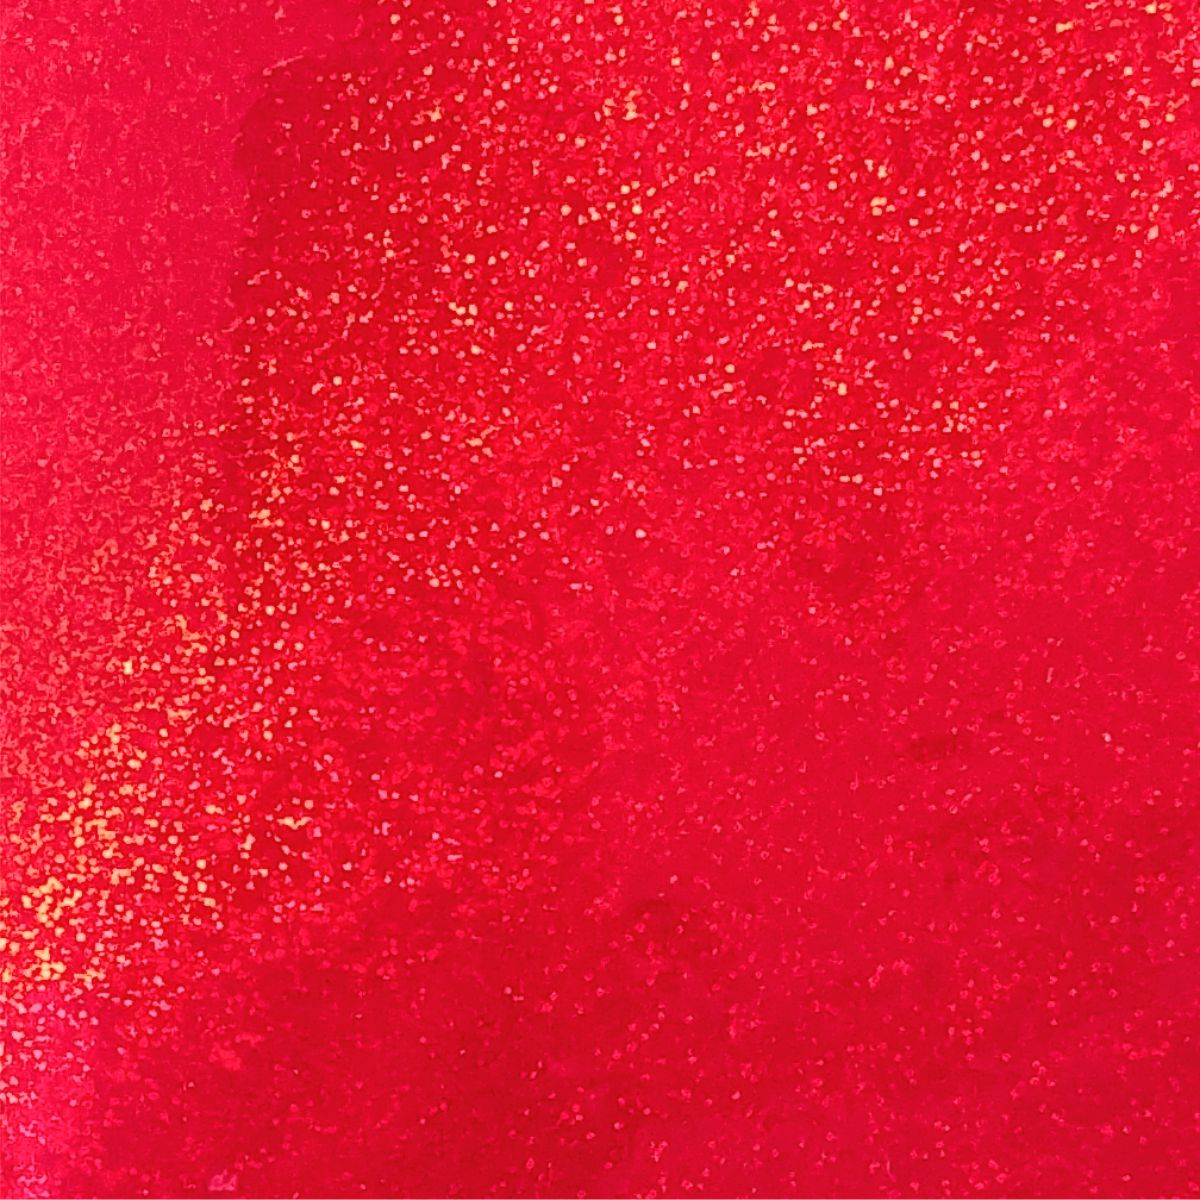 Red Chunky Glitter, Cheery Cherry Chunky Mix Holographic Glitter